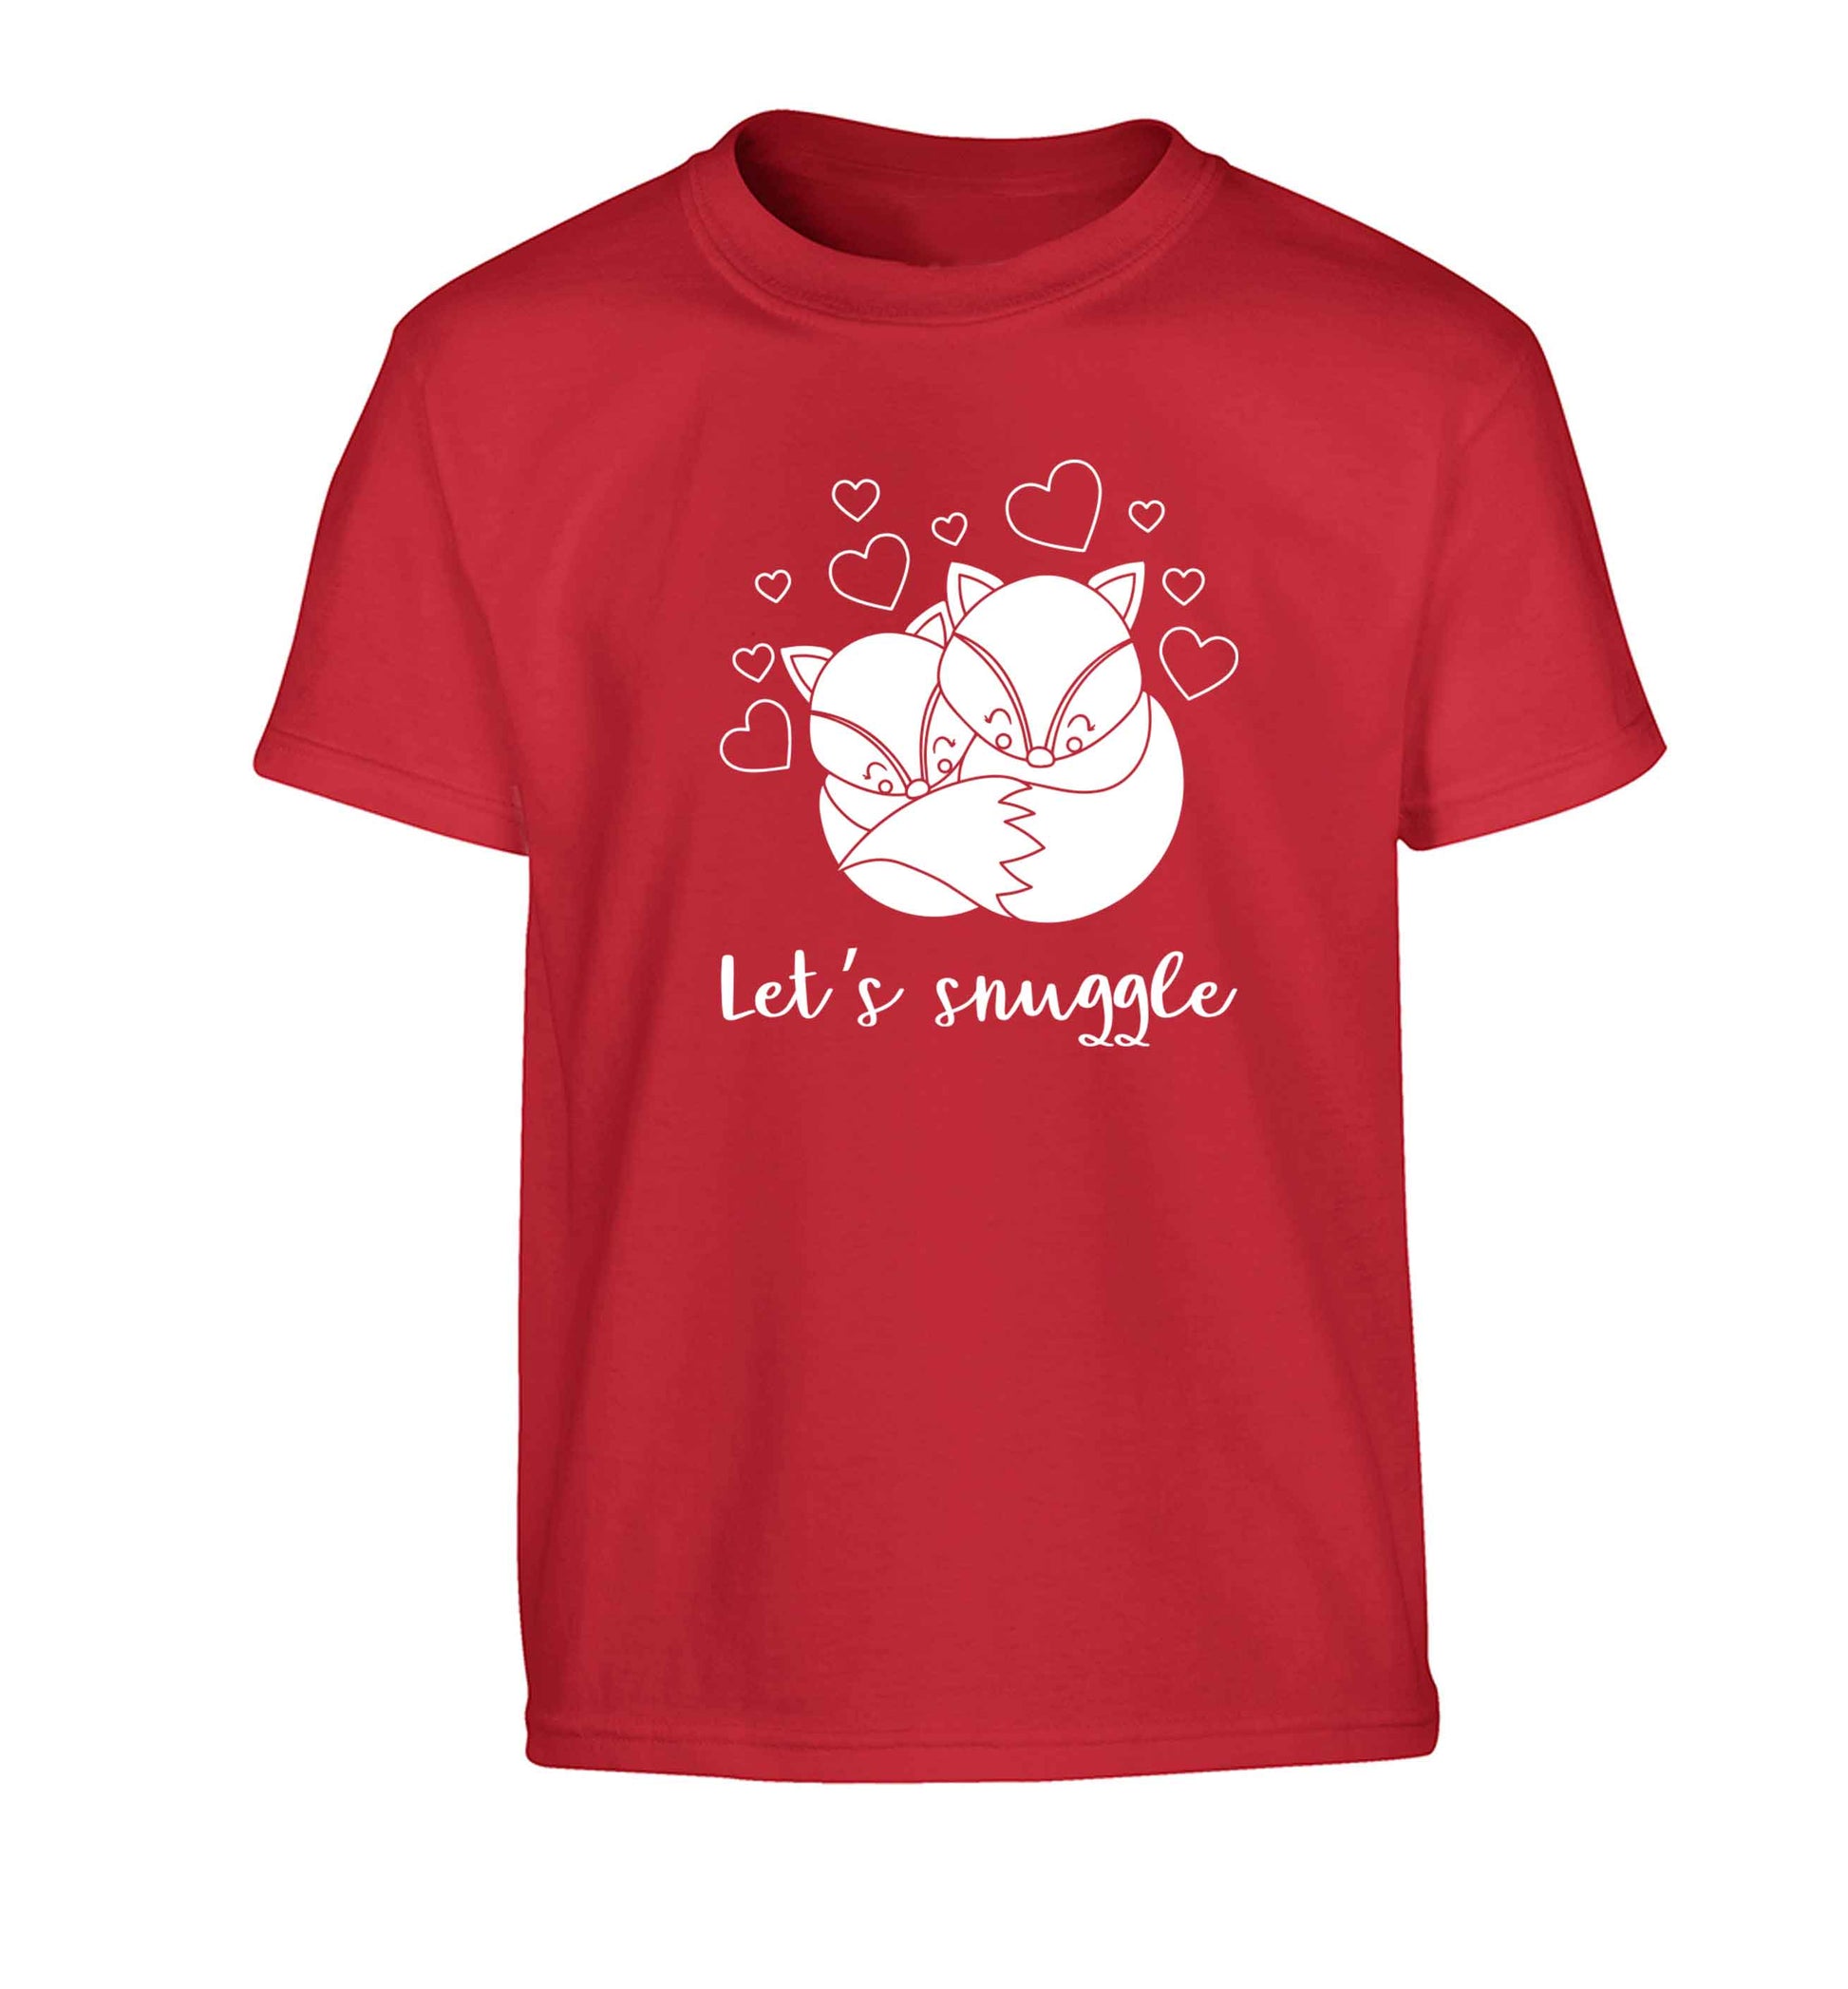 Let's snuggle Children's red Tshirt 12-13 Years